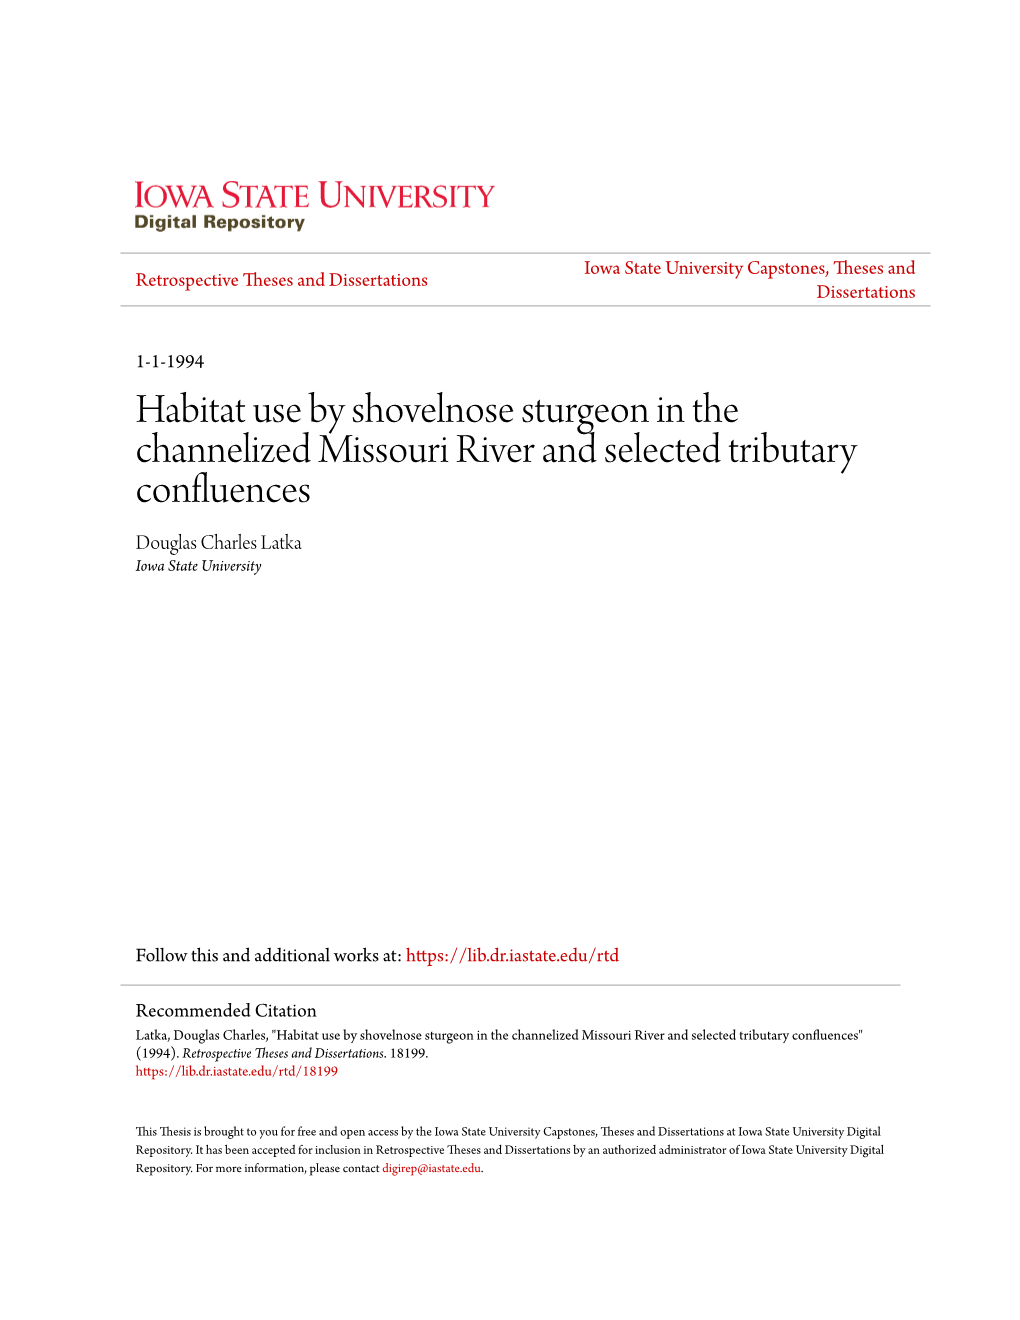 Habitat Use by Shovelnose Sturgeon in the Channelized Missouri River and Selected Tributary Confluences Douglas Charles Latka Iowa State University